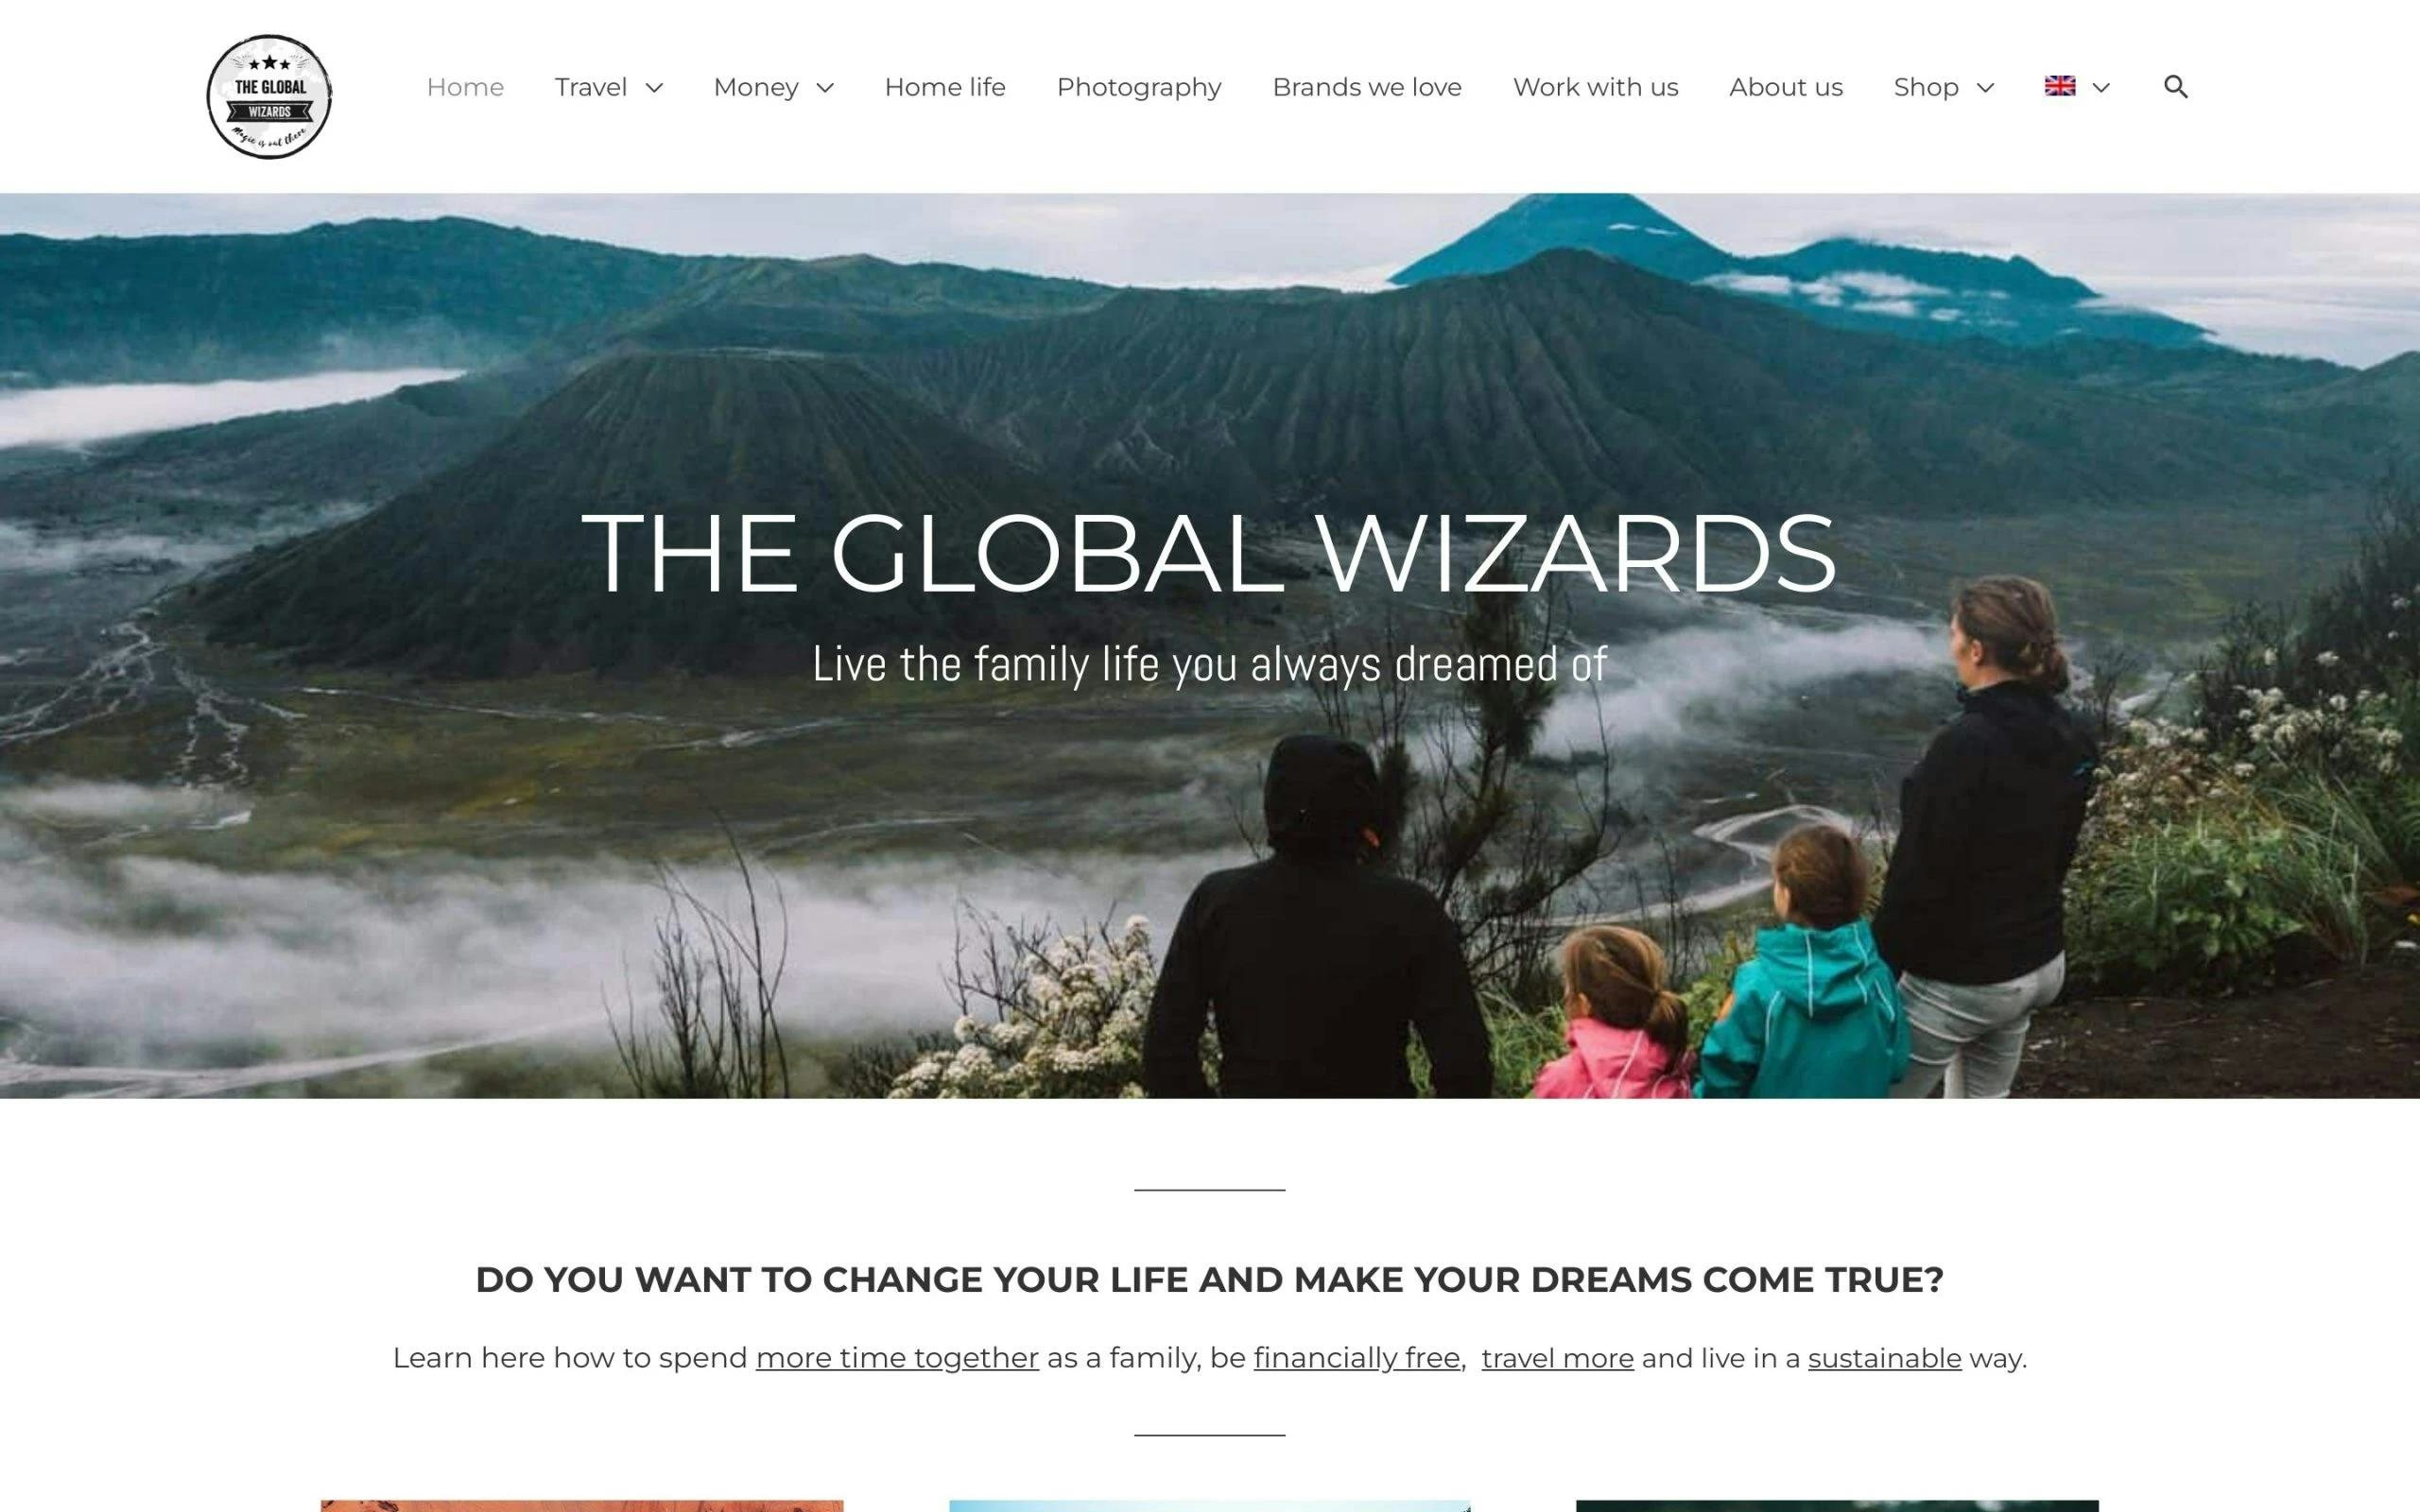 The Global Wizards travel blog